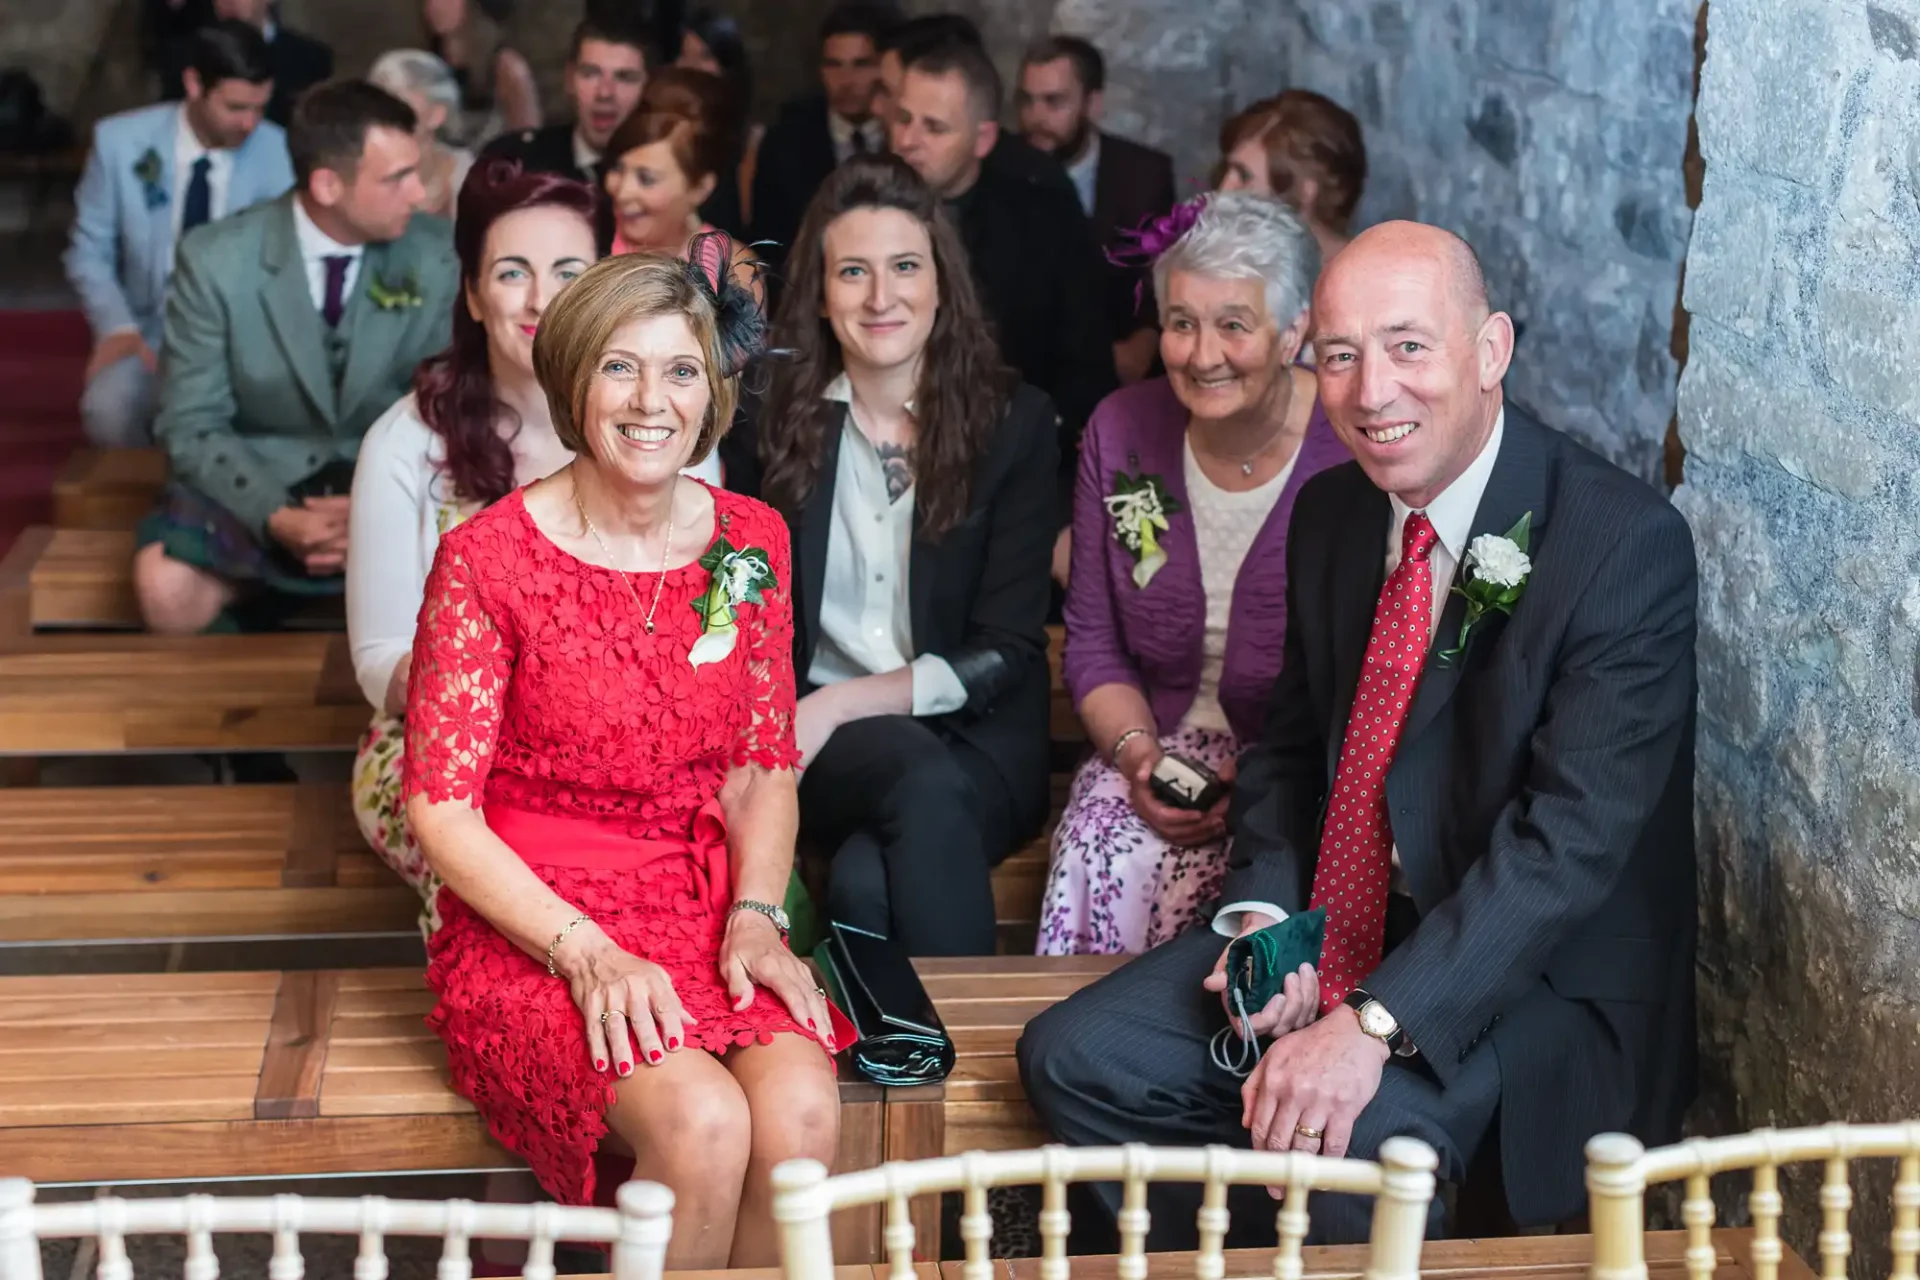 Group of guests sitting in a church pew at a wedding, smiling towards the camera, including an older couple in the front row with flowers on their outfits.